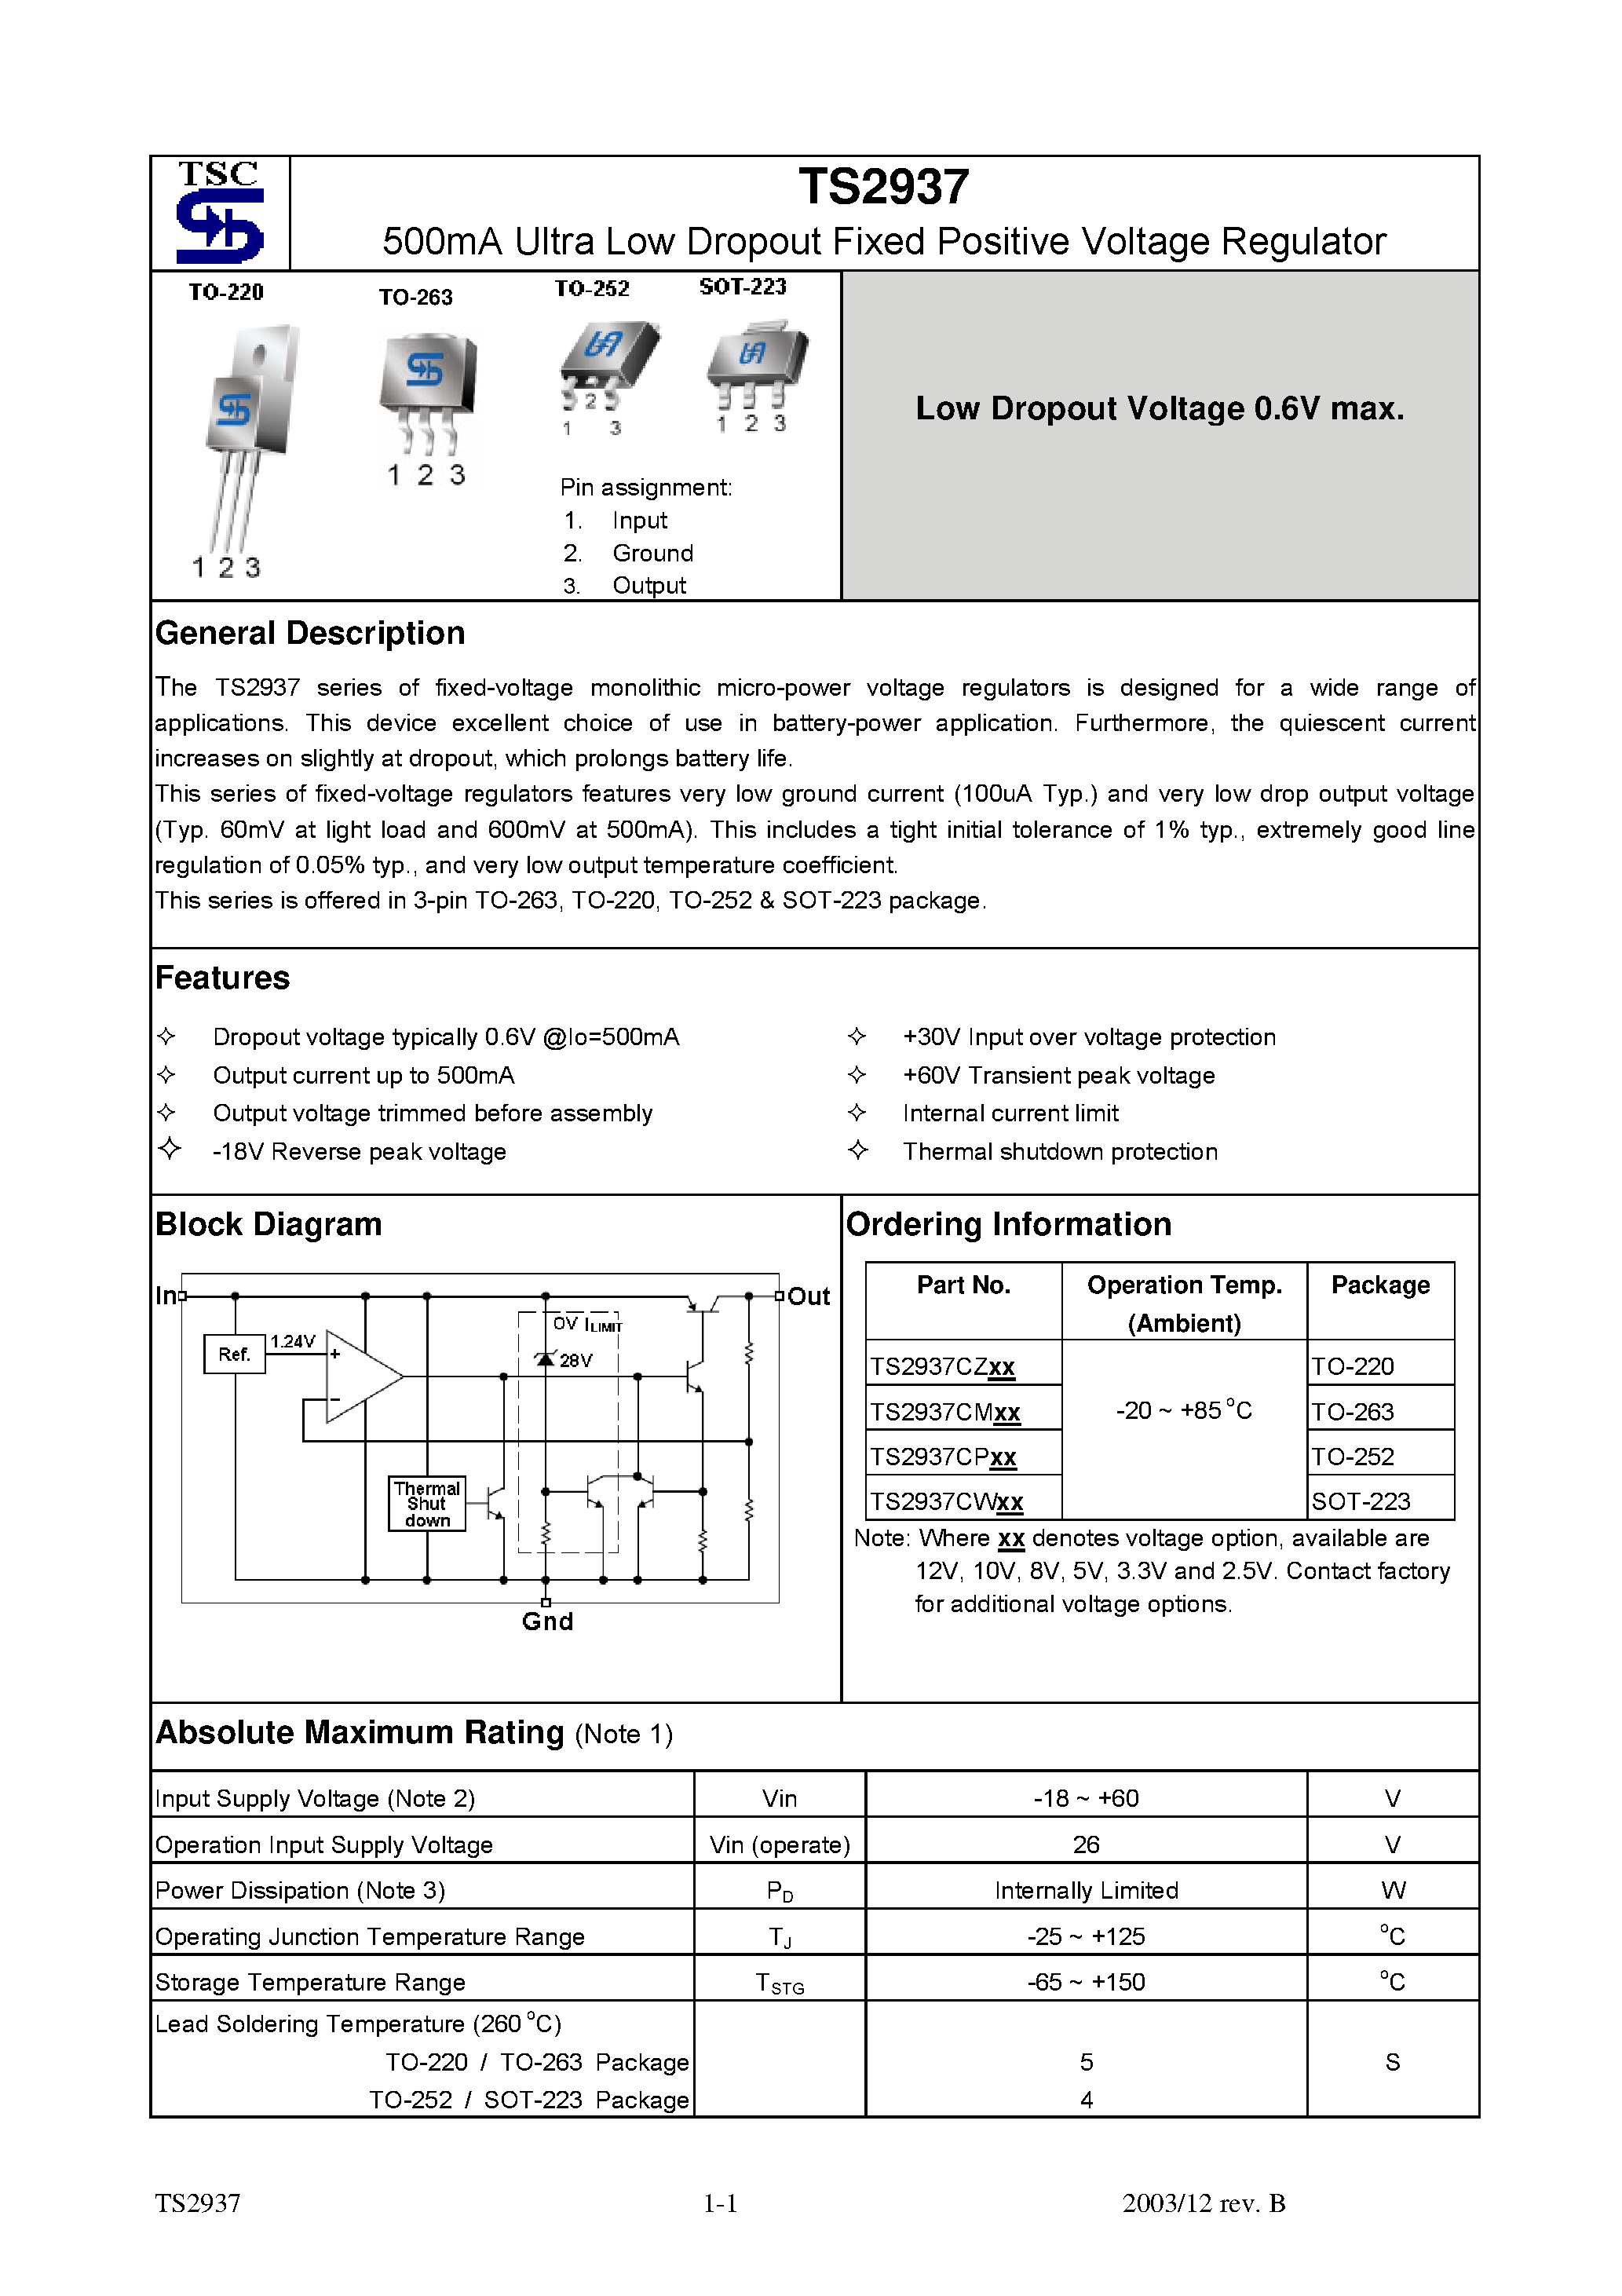 Datasheet TS2937 - 500mA Ultra Low Dropout Fixed Positive Voltage Regulator page 1